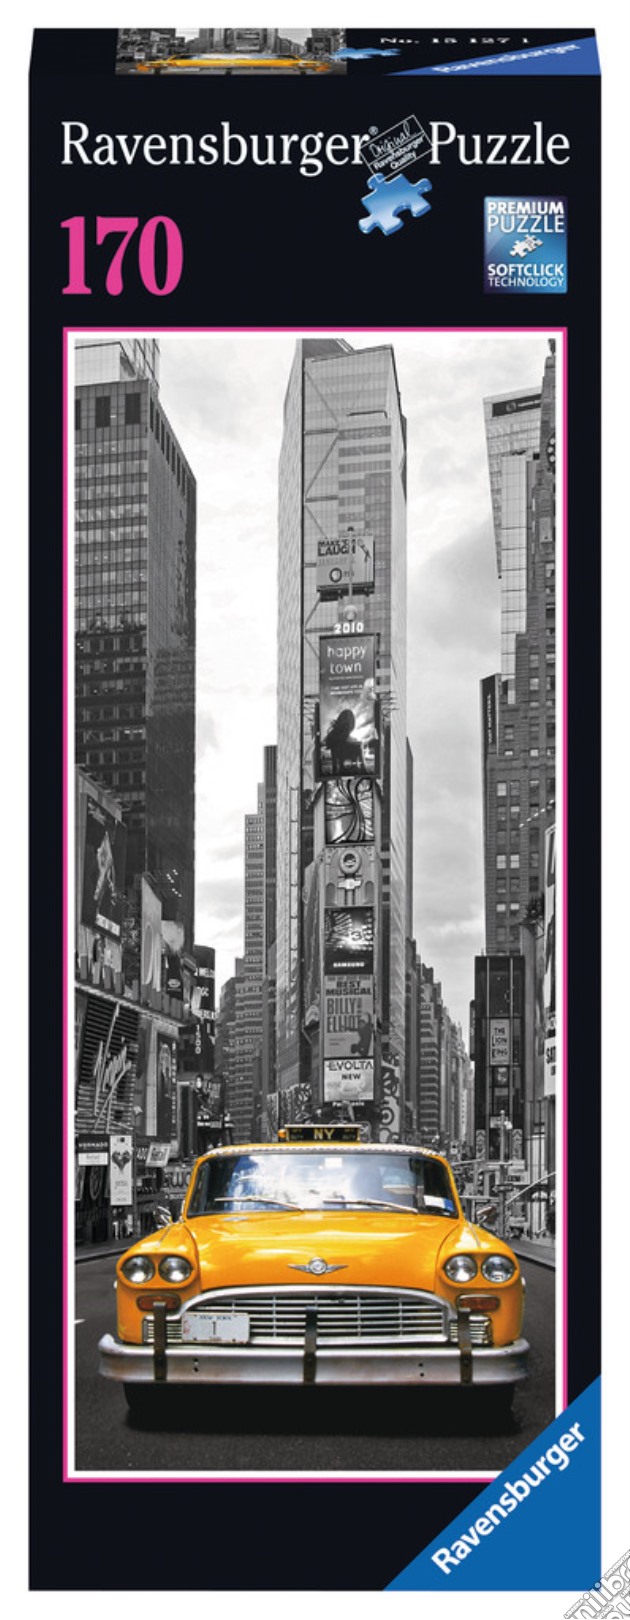 Puzzle Panorama Verticale - New York Taxi puzzle di RAVENSBURGER